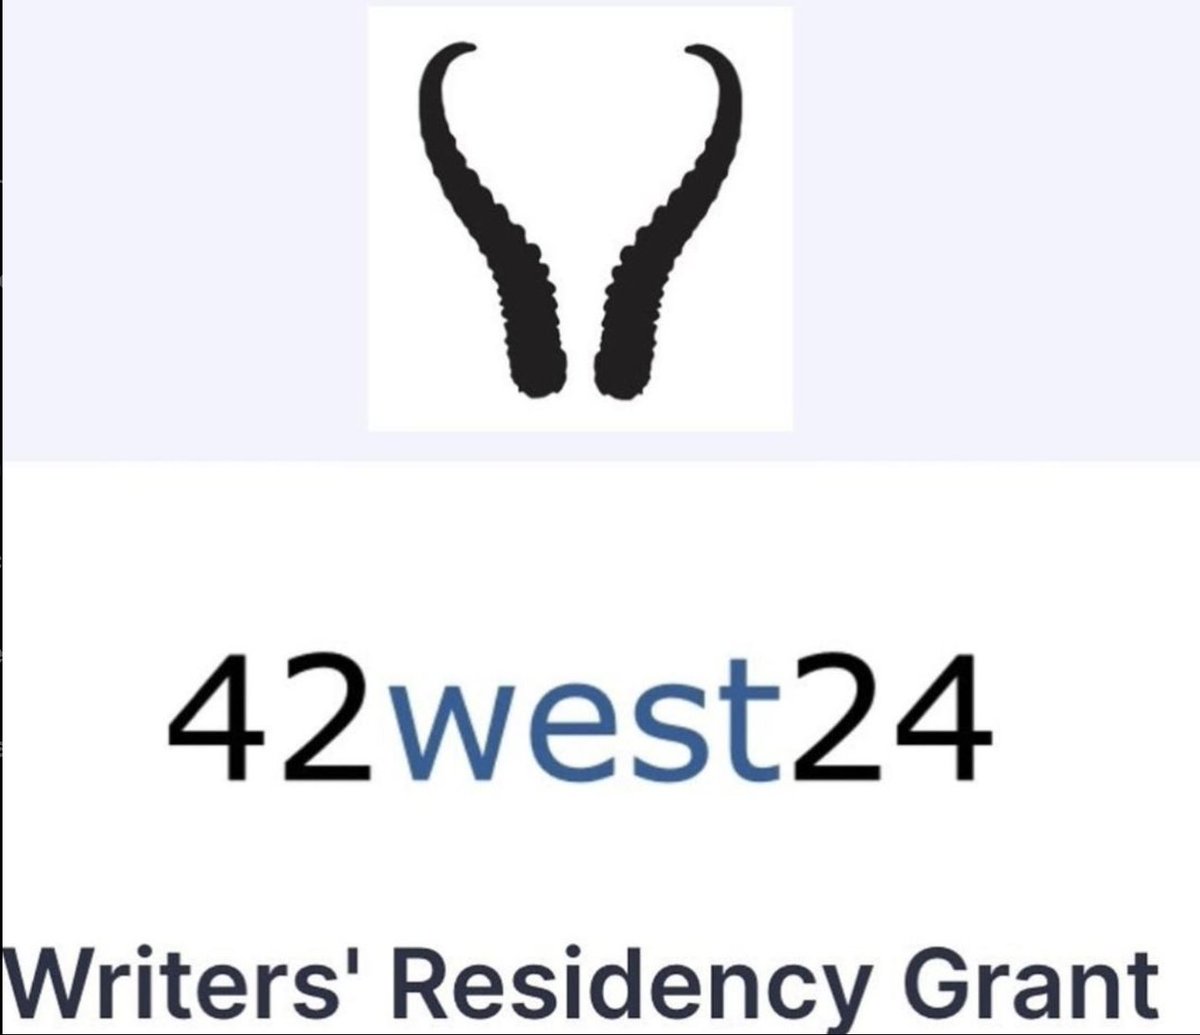 One month to go! The #42west24 Writers' Residency Grant application window for the fall session (Oct–Dec) closes August 31 at midnight. Apply today for 3 months of free 24/7 access to write, edit and dream your next project into existence. Find more info via our website homepage